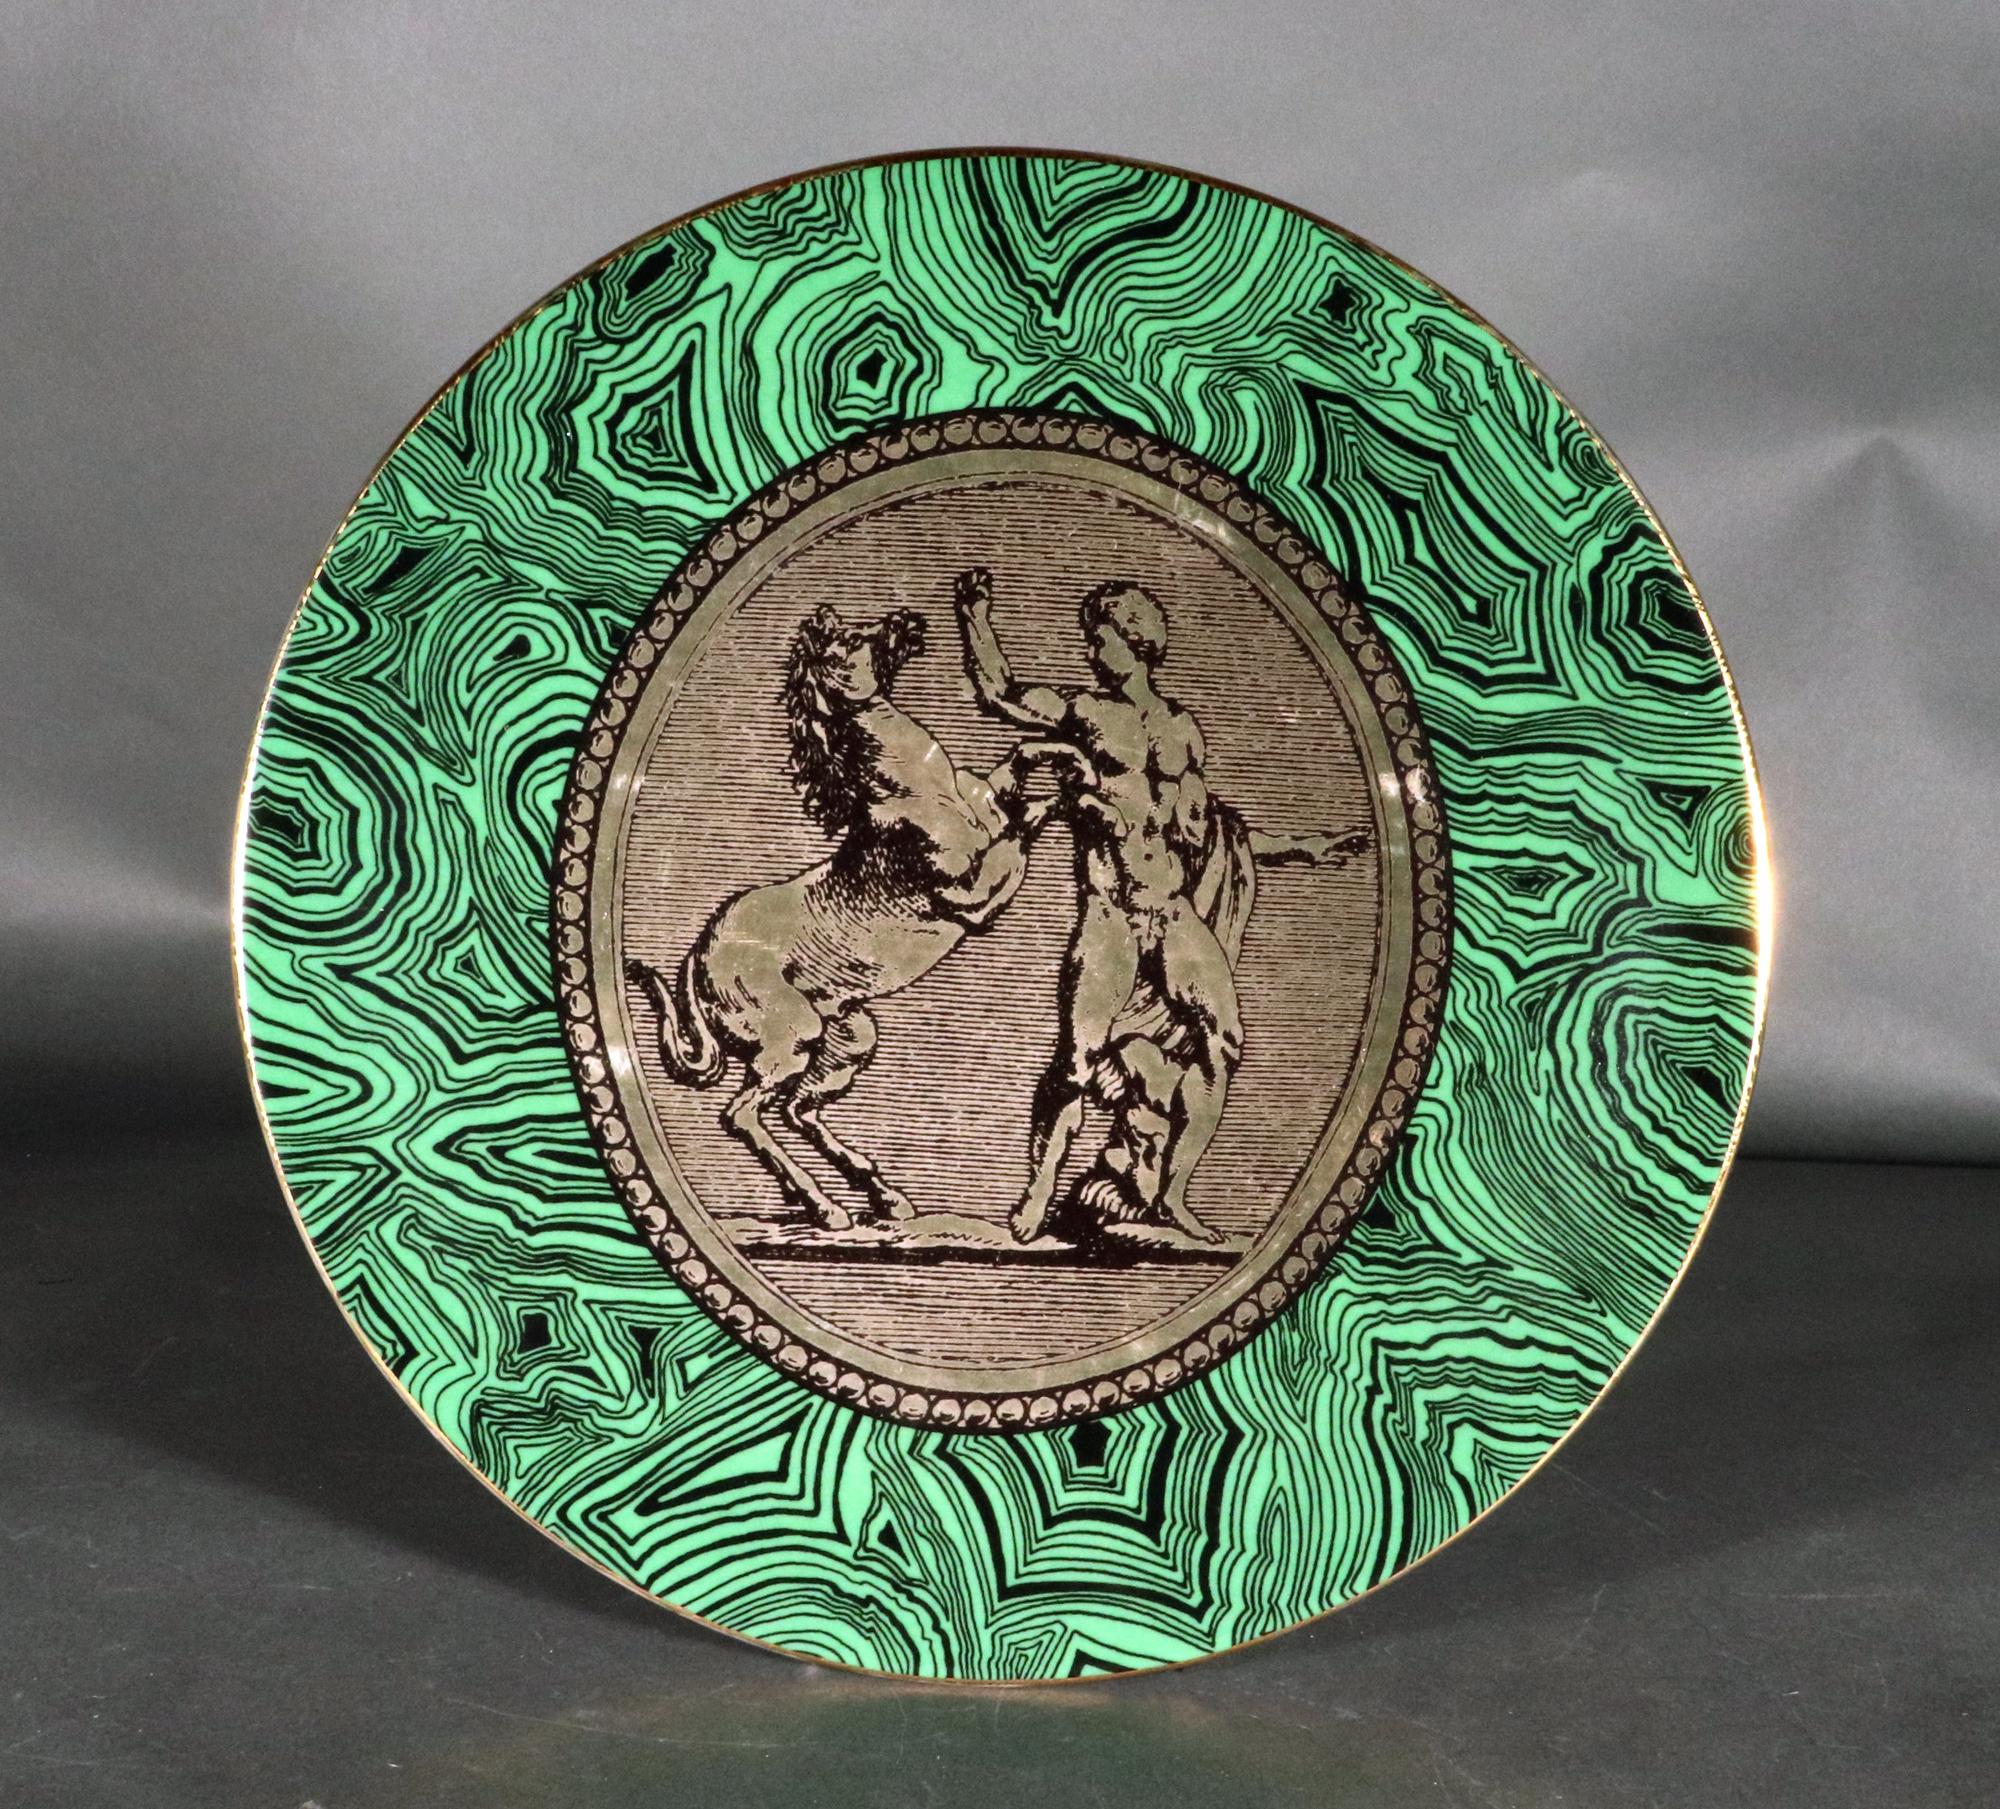 Piero Fornasetti Porcelain Green Malachite Cammei Plate,
Cammei or Cameo,
Circa 1950s-60s
From a group of Five.

The Piero Fornasetti porcelain plate, named Cammei on the reverse, meaning Cameo, has a ground of green malachite with a central panel